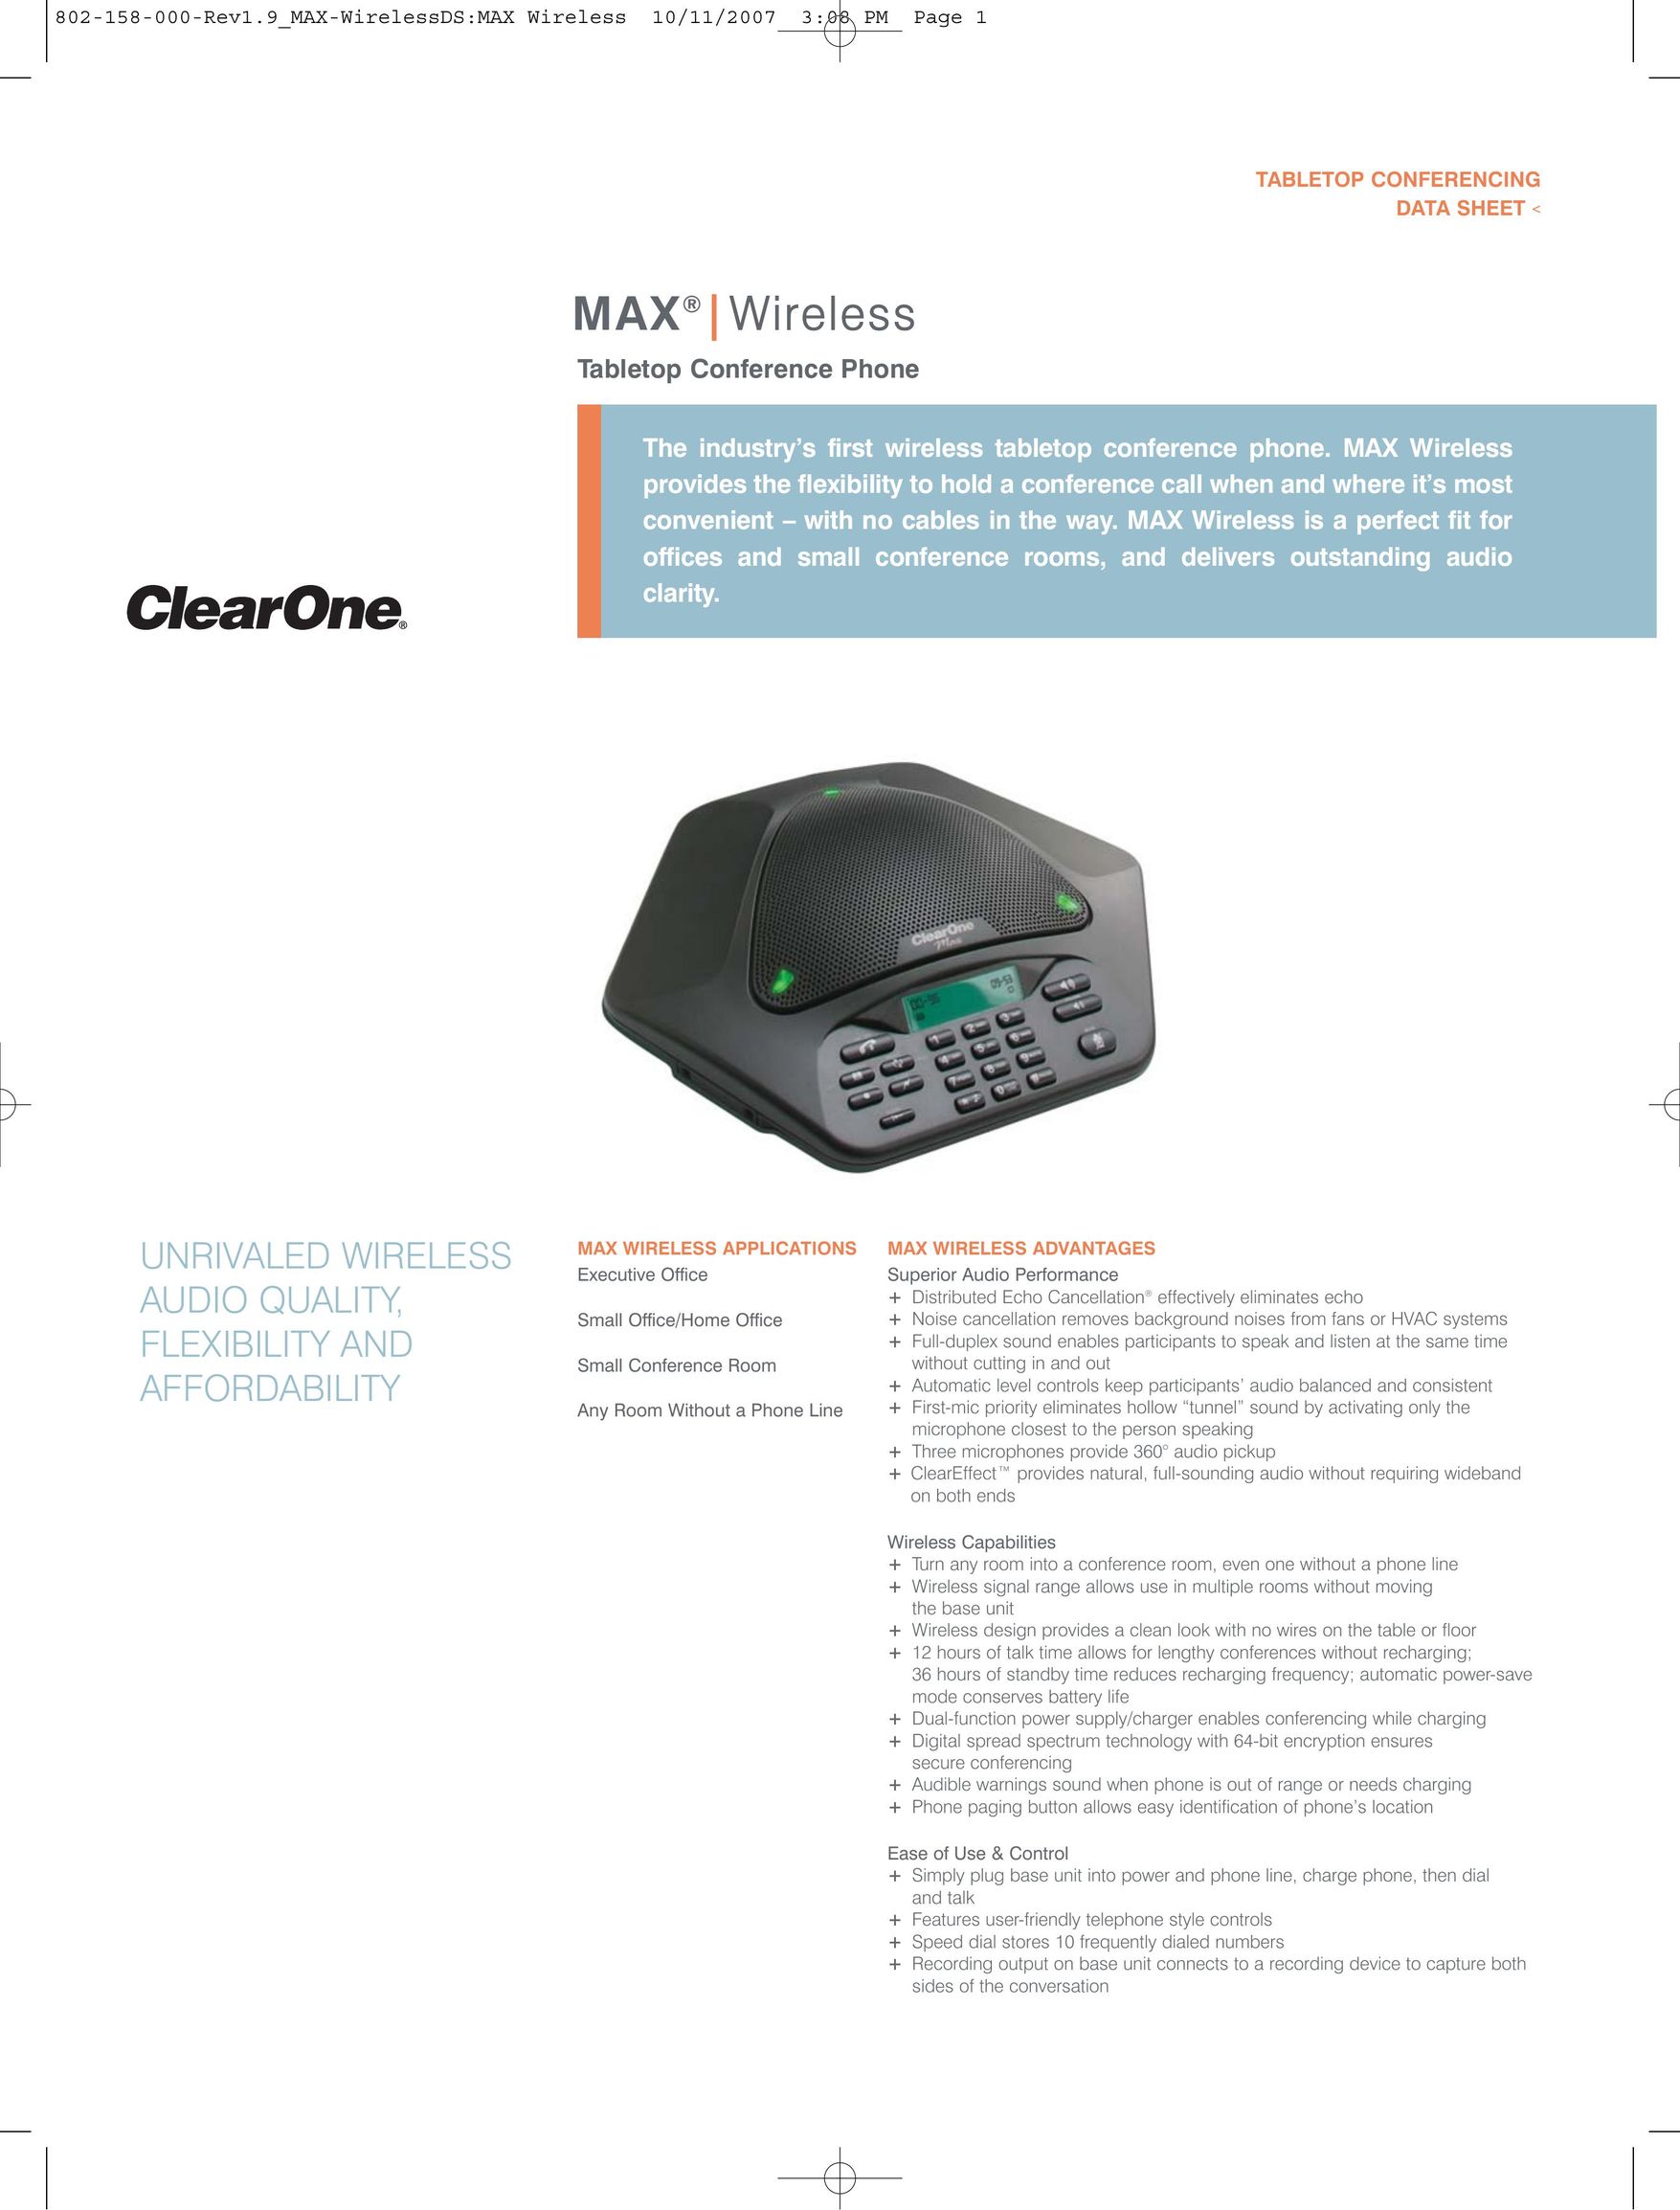 ClearOne comm 910-158-400 Conference Phone User Manual